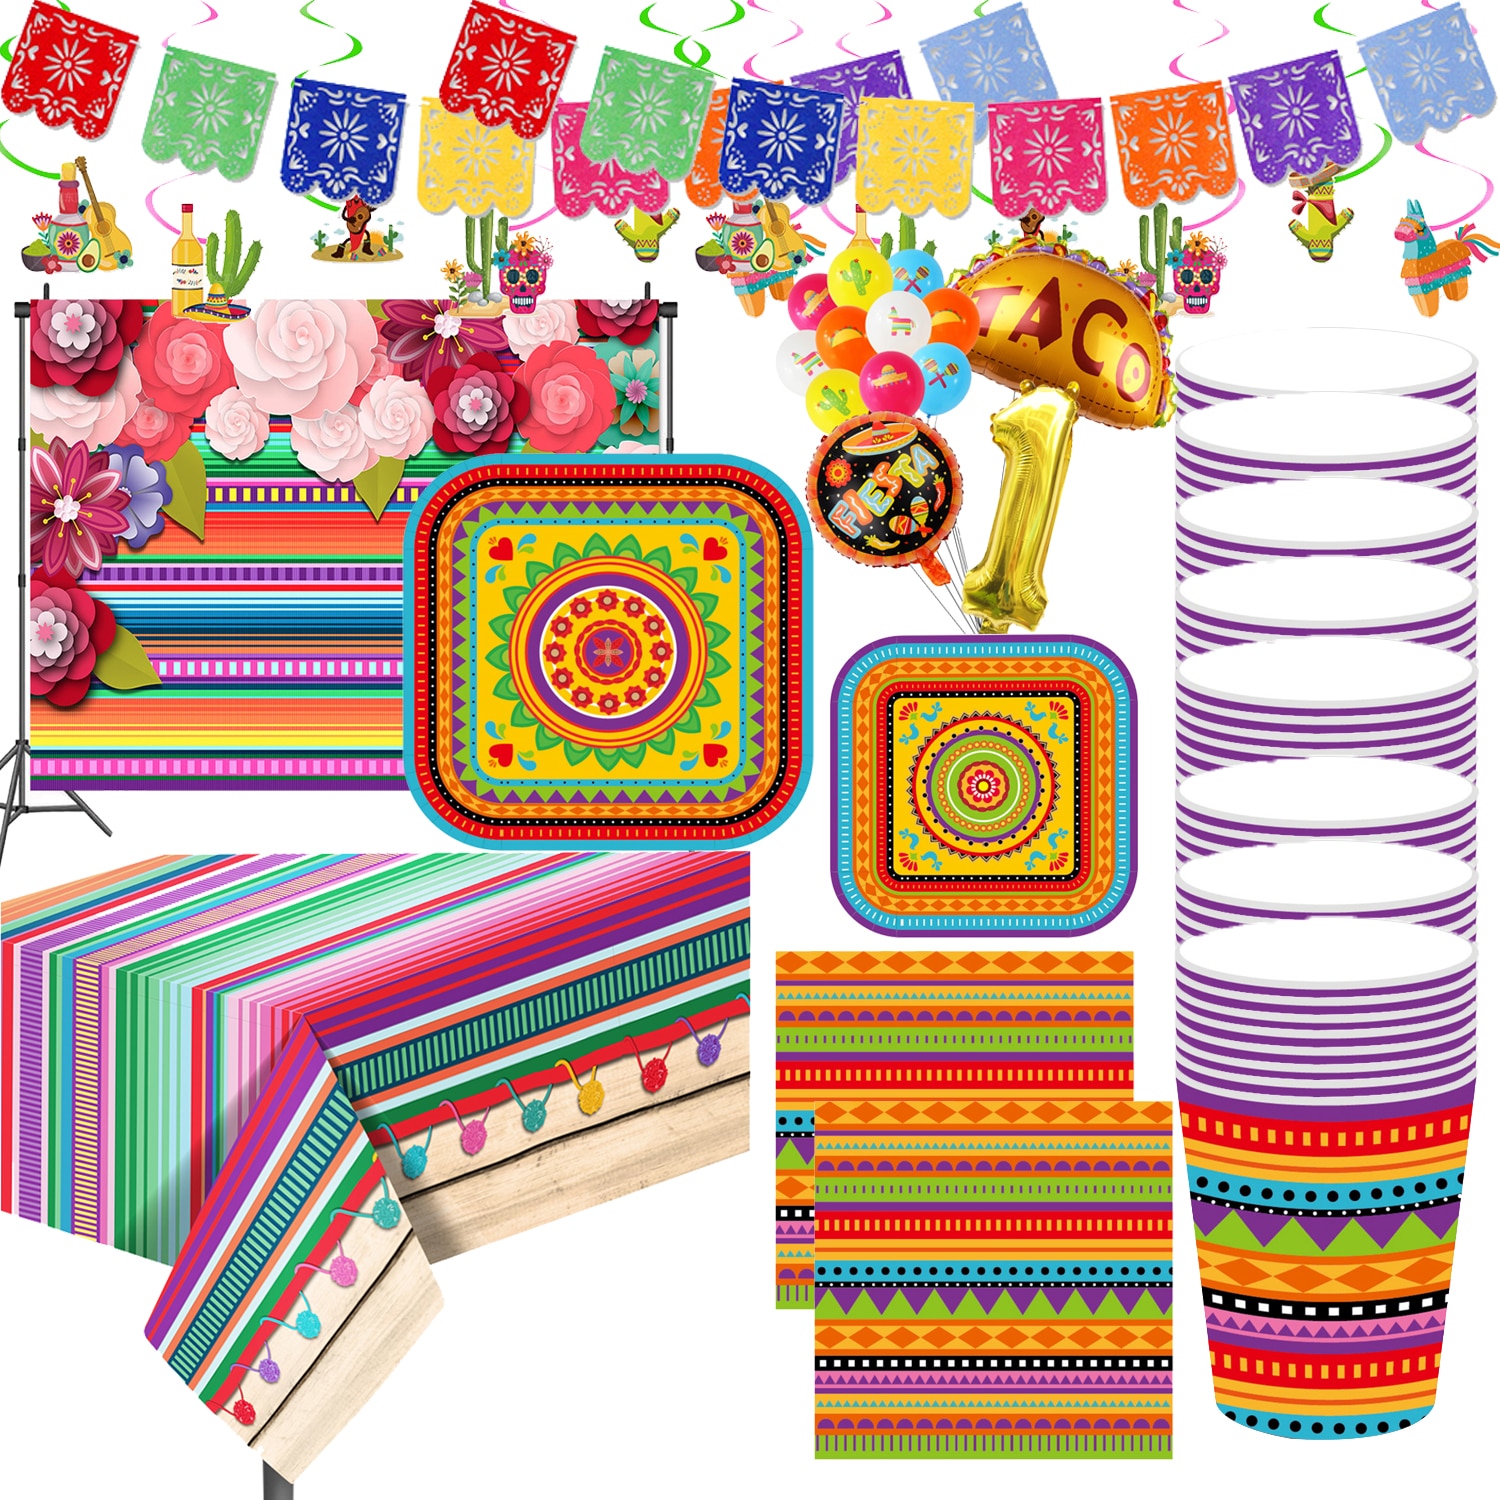 Mexican Birthday Party Supplies Set Plates Cups Napkins Tablecloth Banner for Cinco de Mayo Fiesta Themed Party Decorations